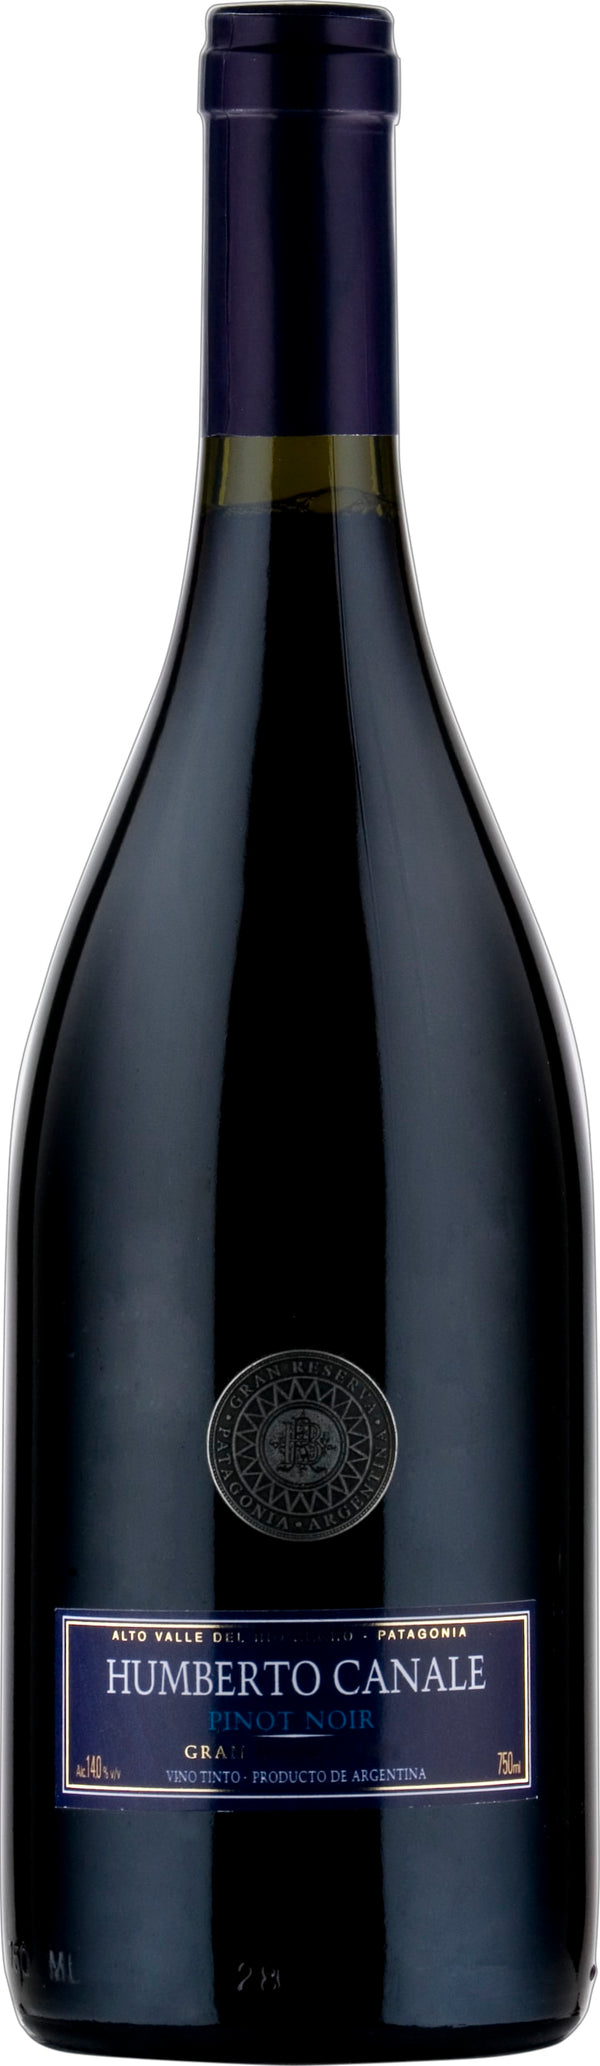 SelFam Pinot Noir 21 Humberto Canale 6x75cl - Just Wines 